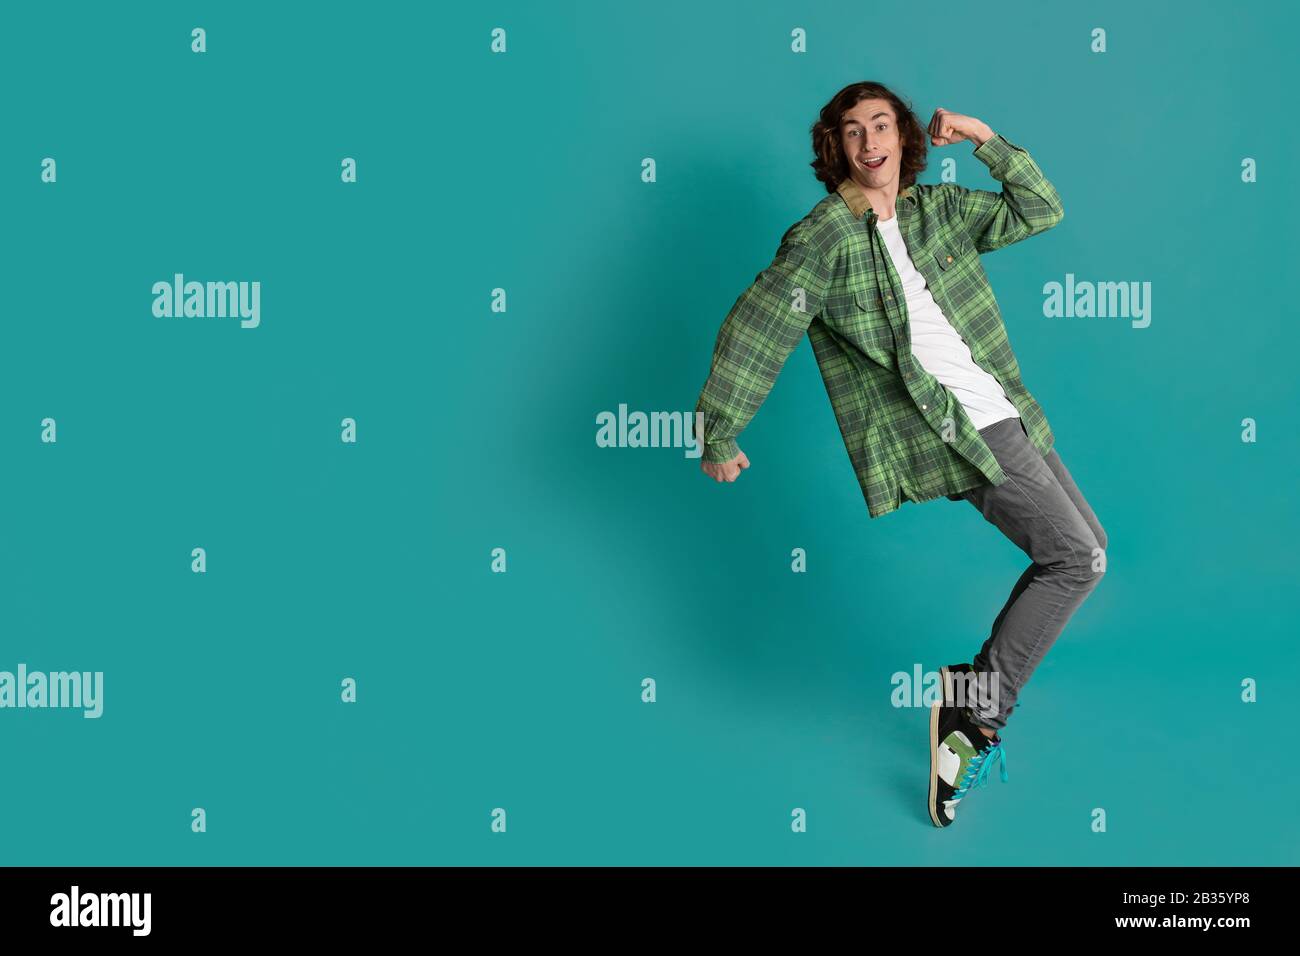 Cheerful young man standing on tiptoes against color background, empty space Stock Photo